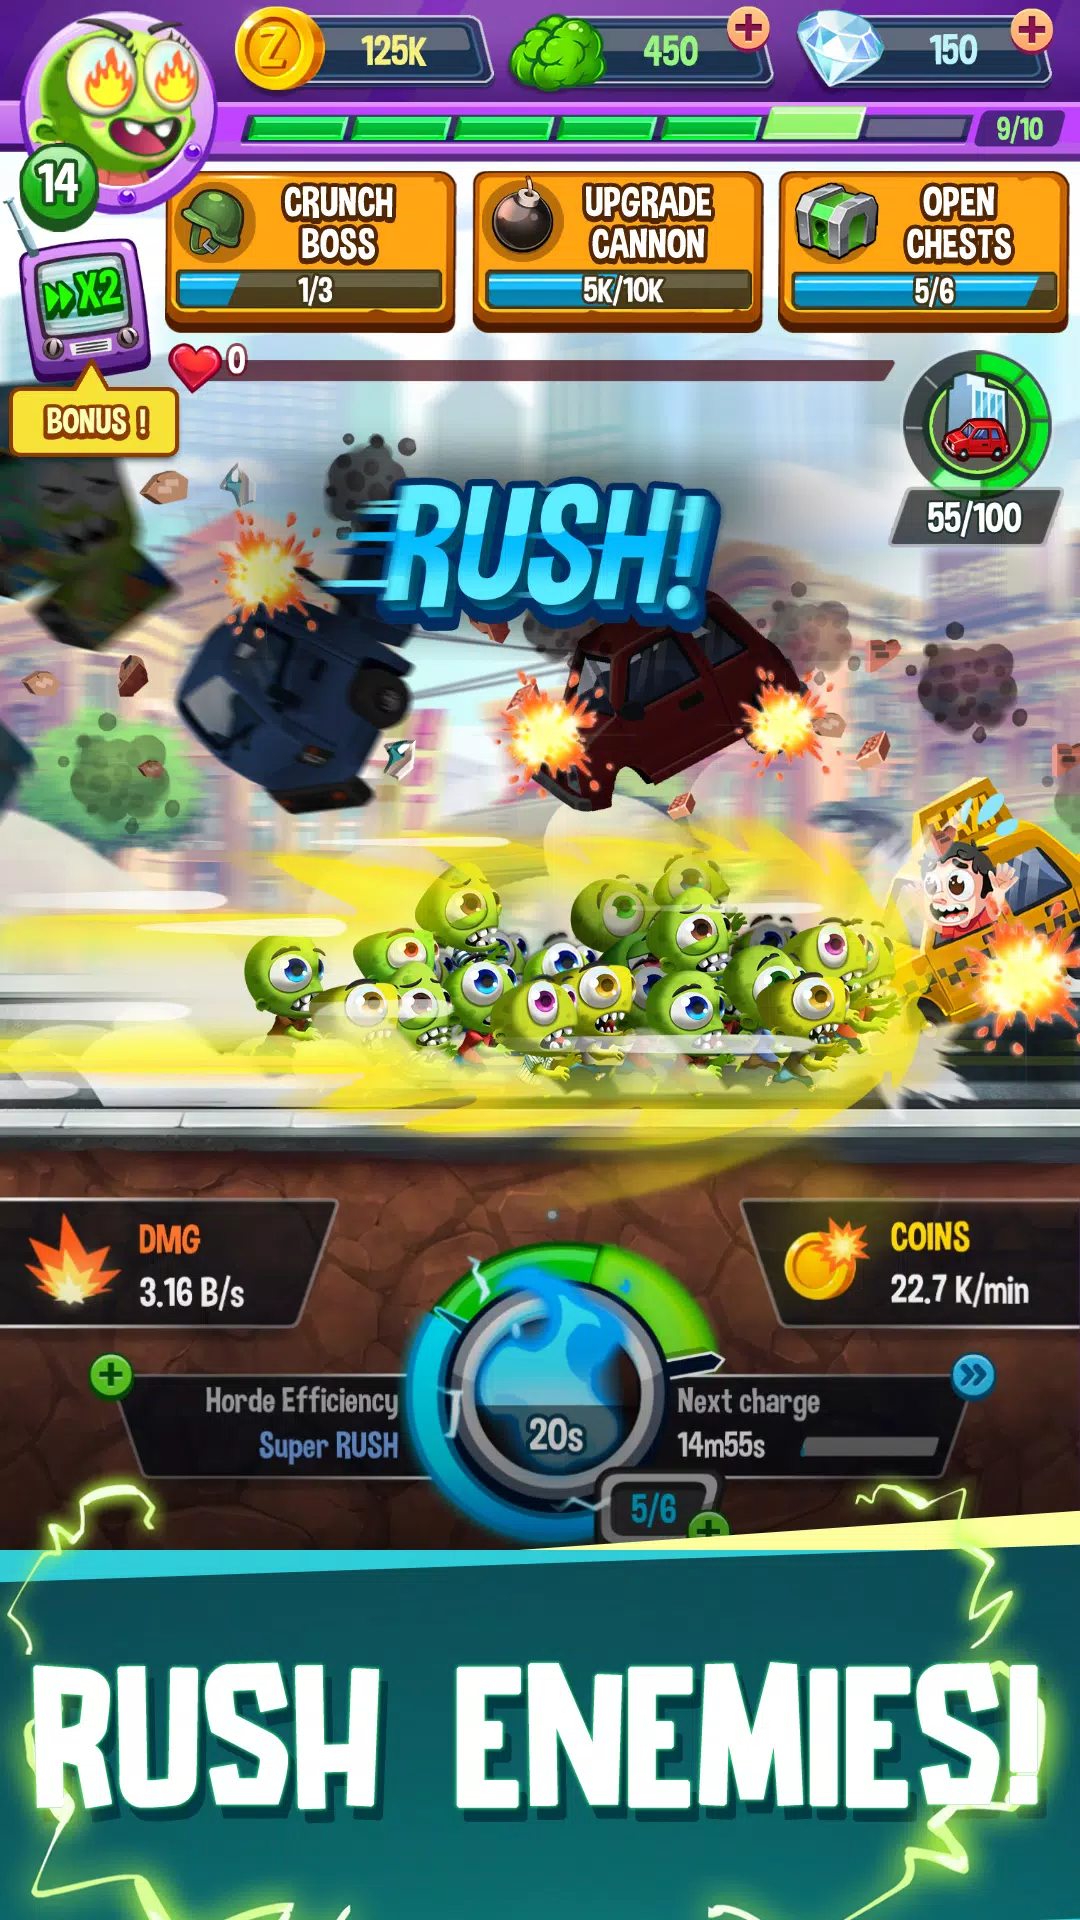 Mobigame's Zombie Tsunami - What's in your head?